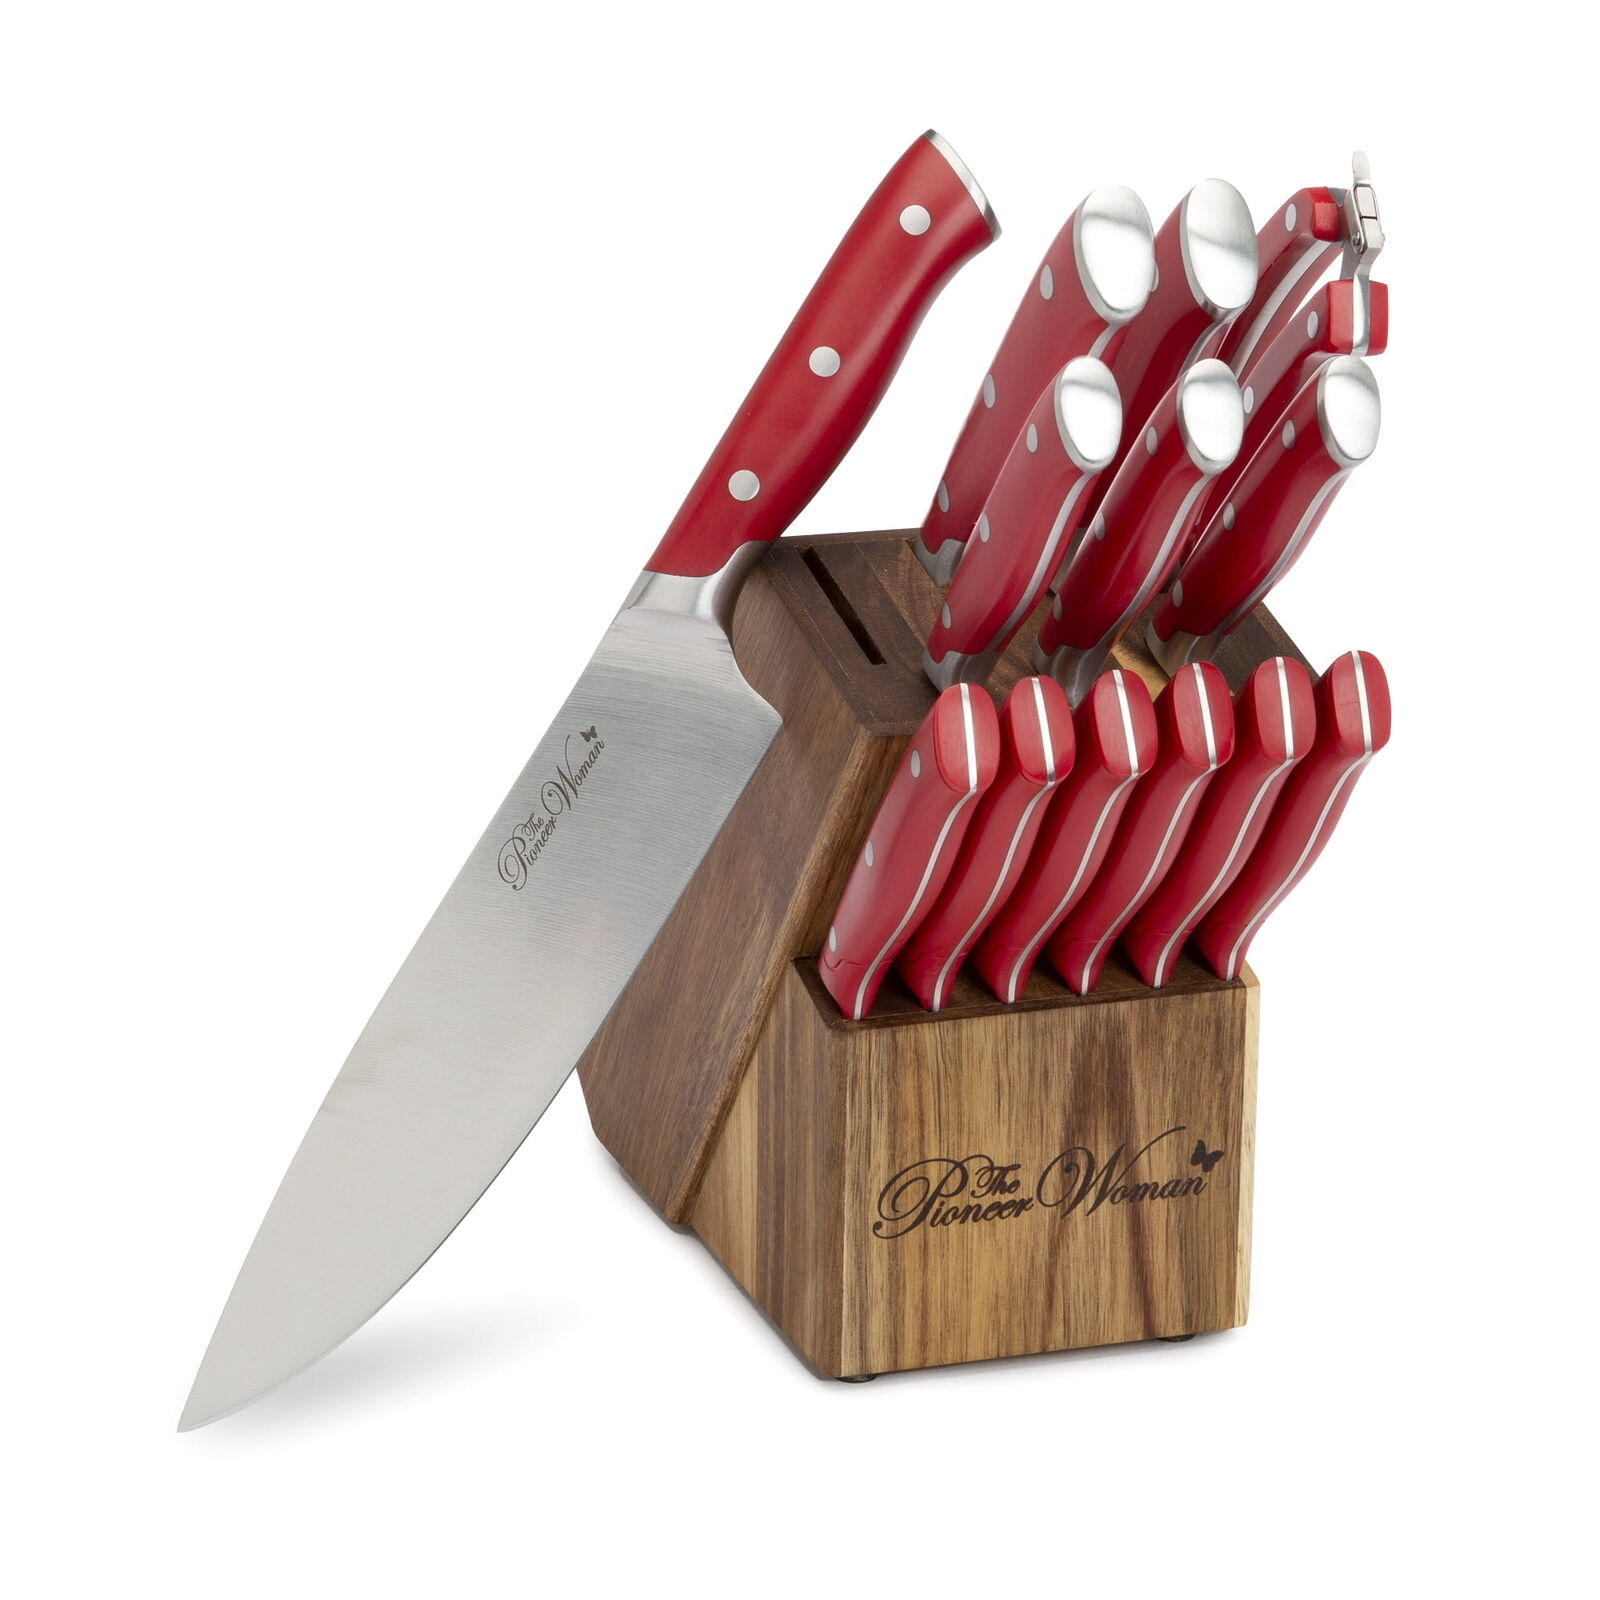 The Pioneer Woman Pioneer Signature 14-Piece Stainless Steel Knife Block Set,Red Does not apply